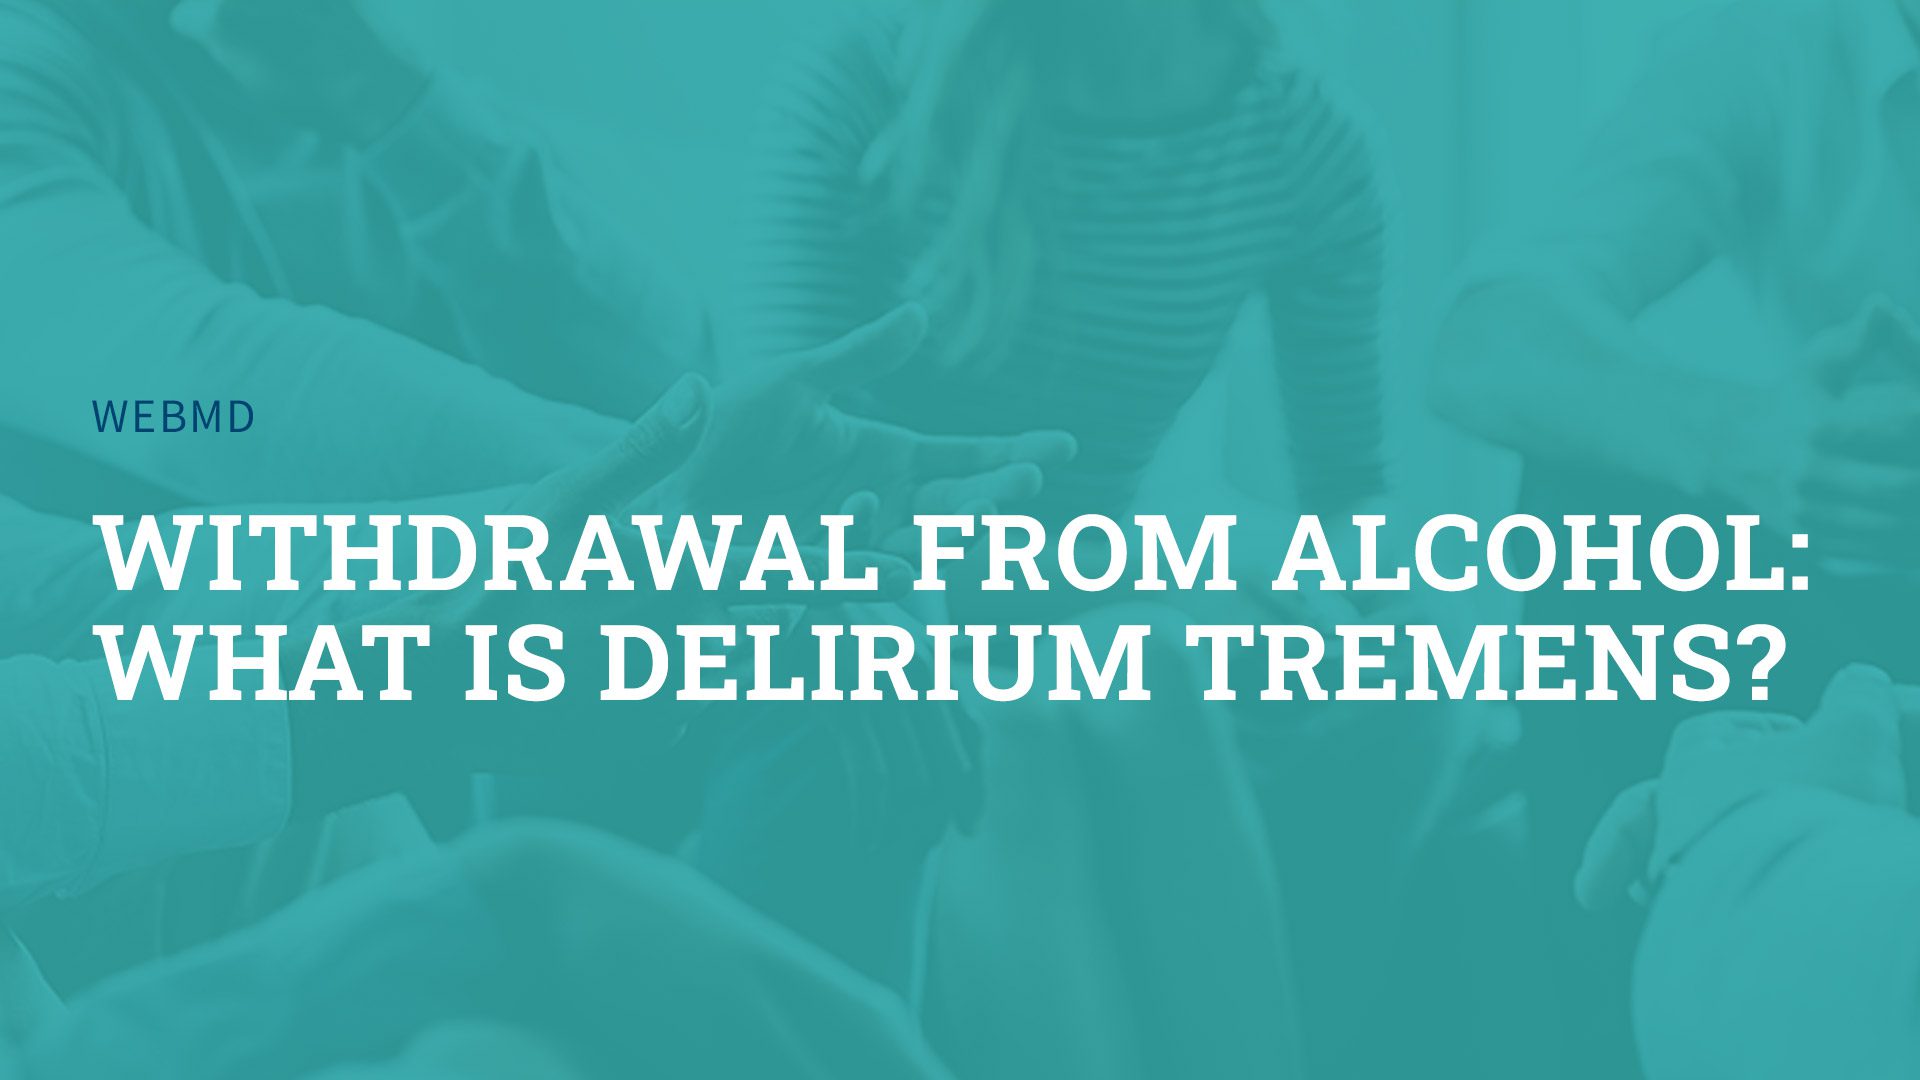 Withdrawal from Alcohol: What is Delirium Tremens?